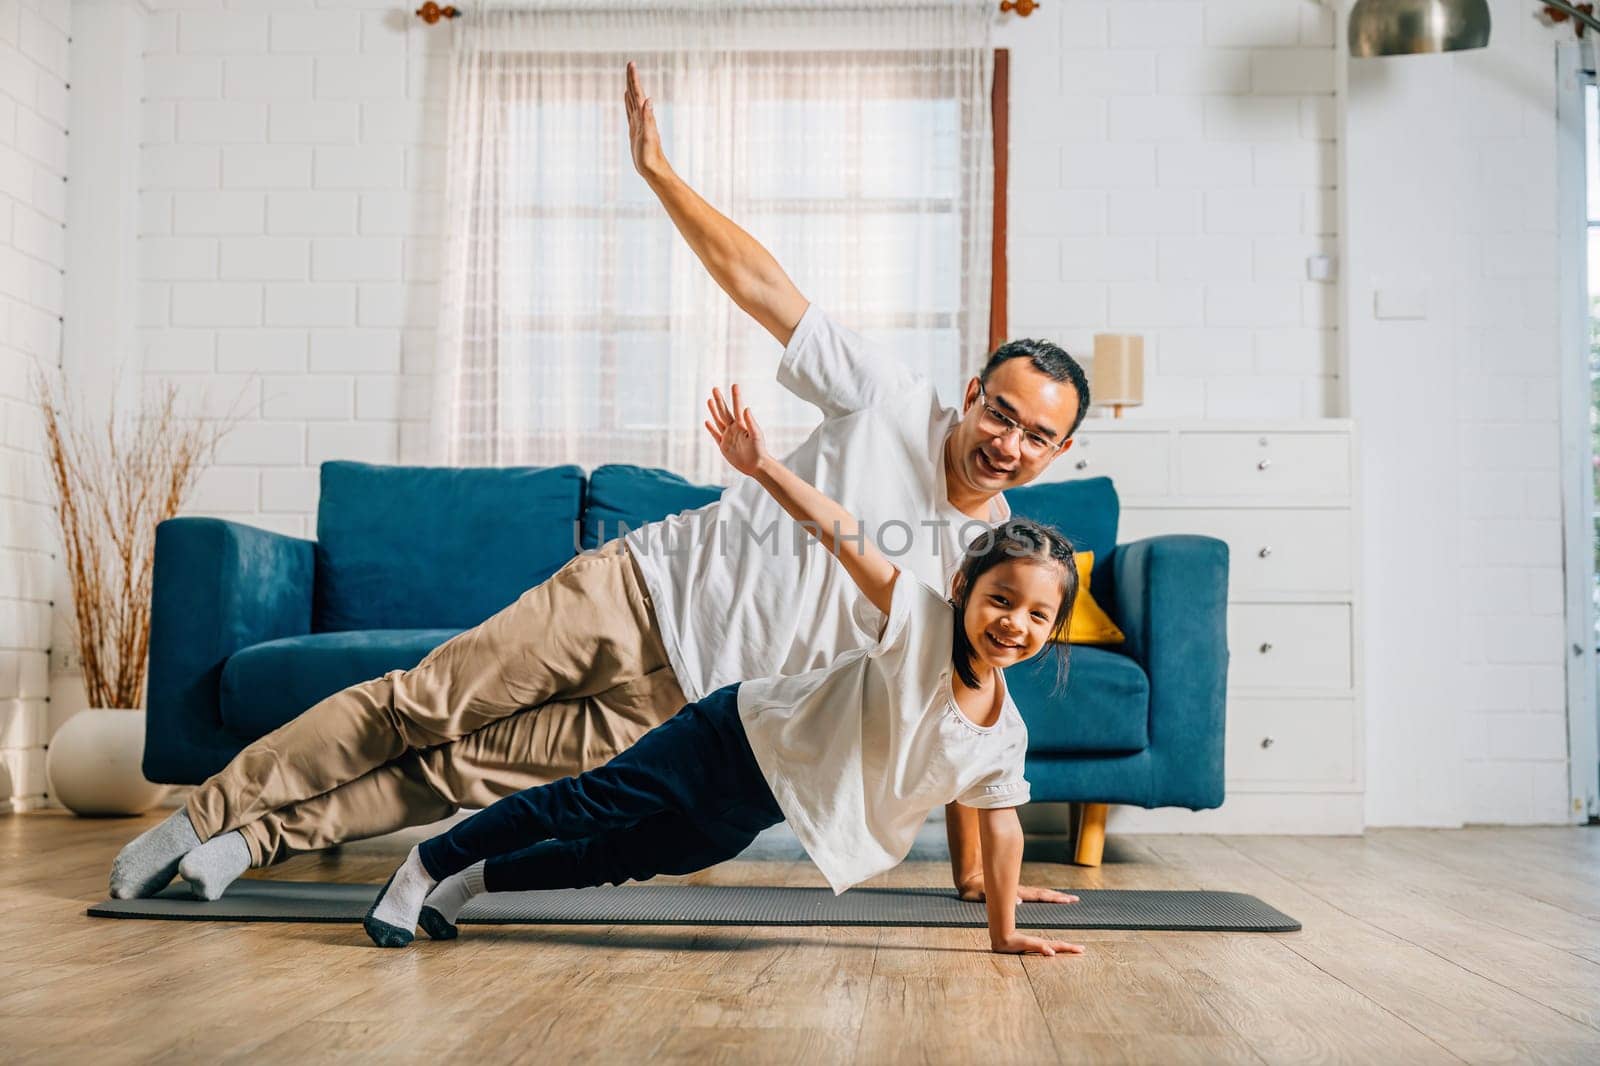 A father and his daughter find joy in yoga at home practicing togetherness happiness by Sorapop